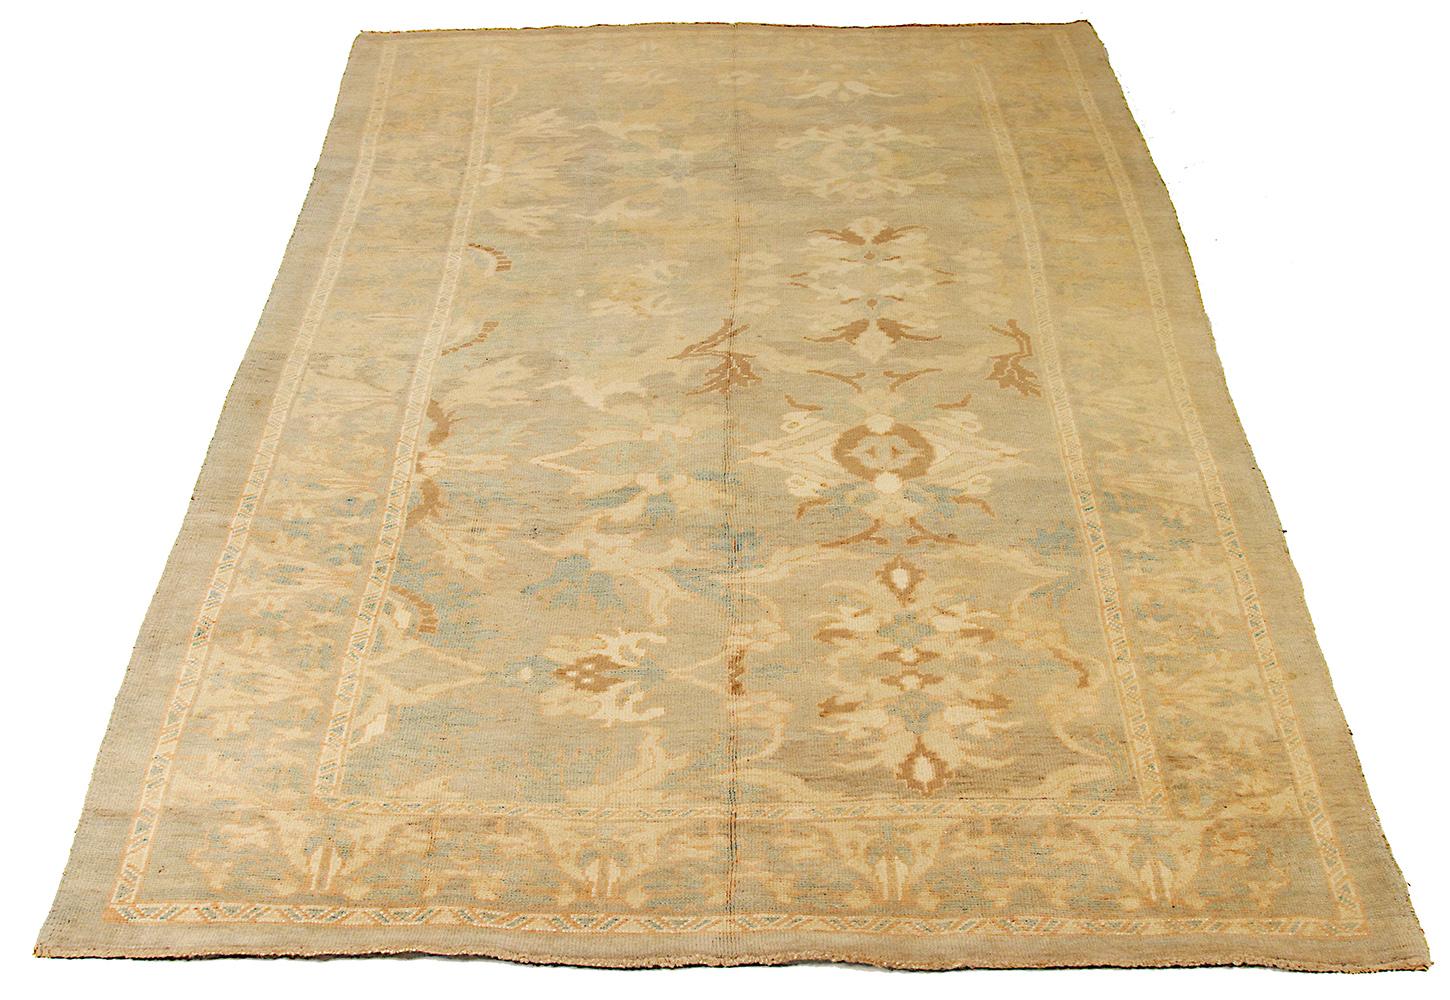 Large handmade Turkish area rug from high-quality sheep’s wool and colored with eco-friendly vegetable dyes that are proven safe for humans and pets alike. It’s a Donegal design showcasing a faded beige field with brown, ivory and blue floral